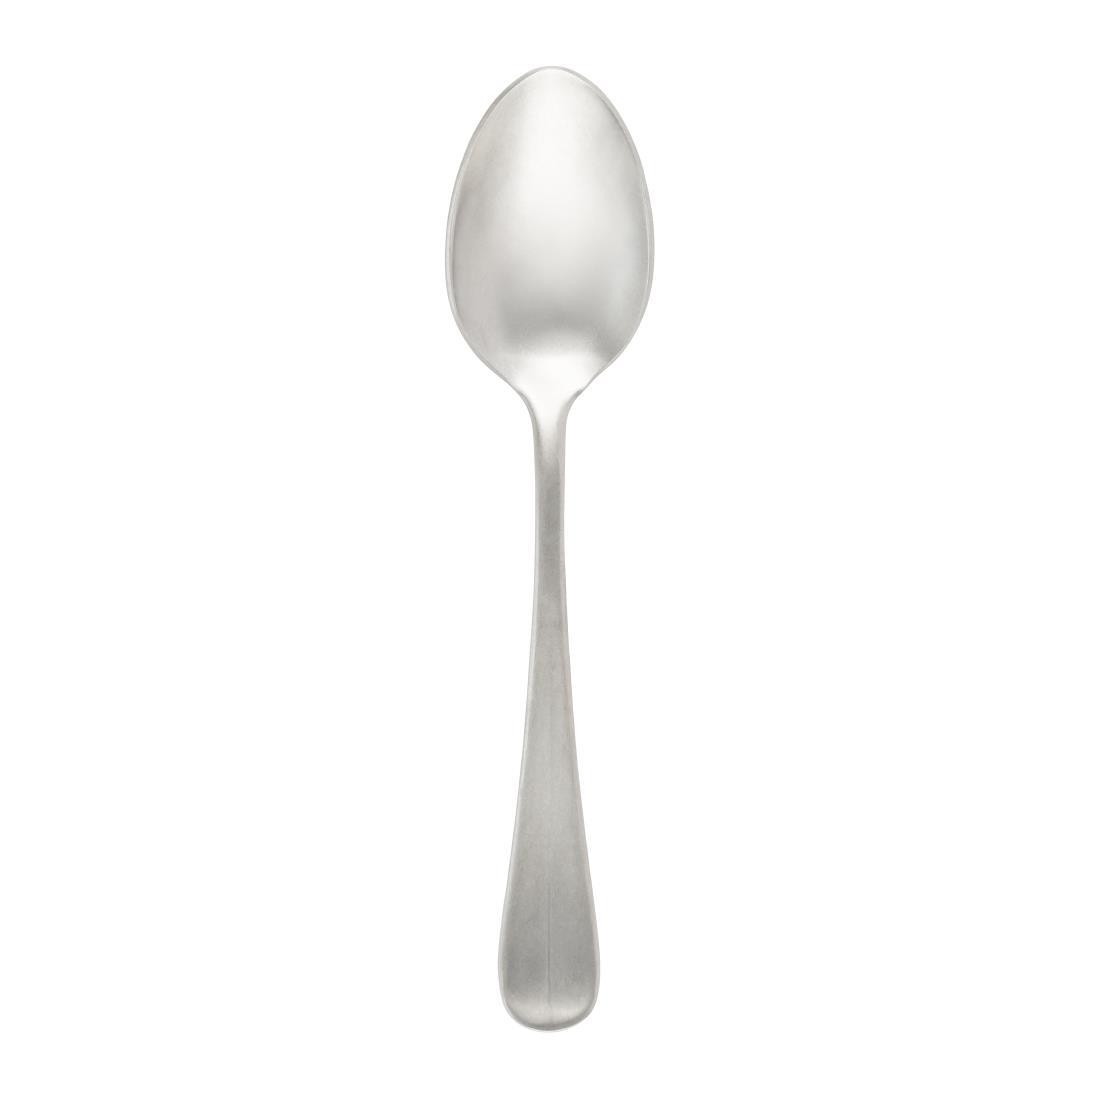 Pintinox Baguette Stonewashed Dessert Spoon (Pack of 12) - GN783  - 2